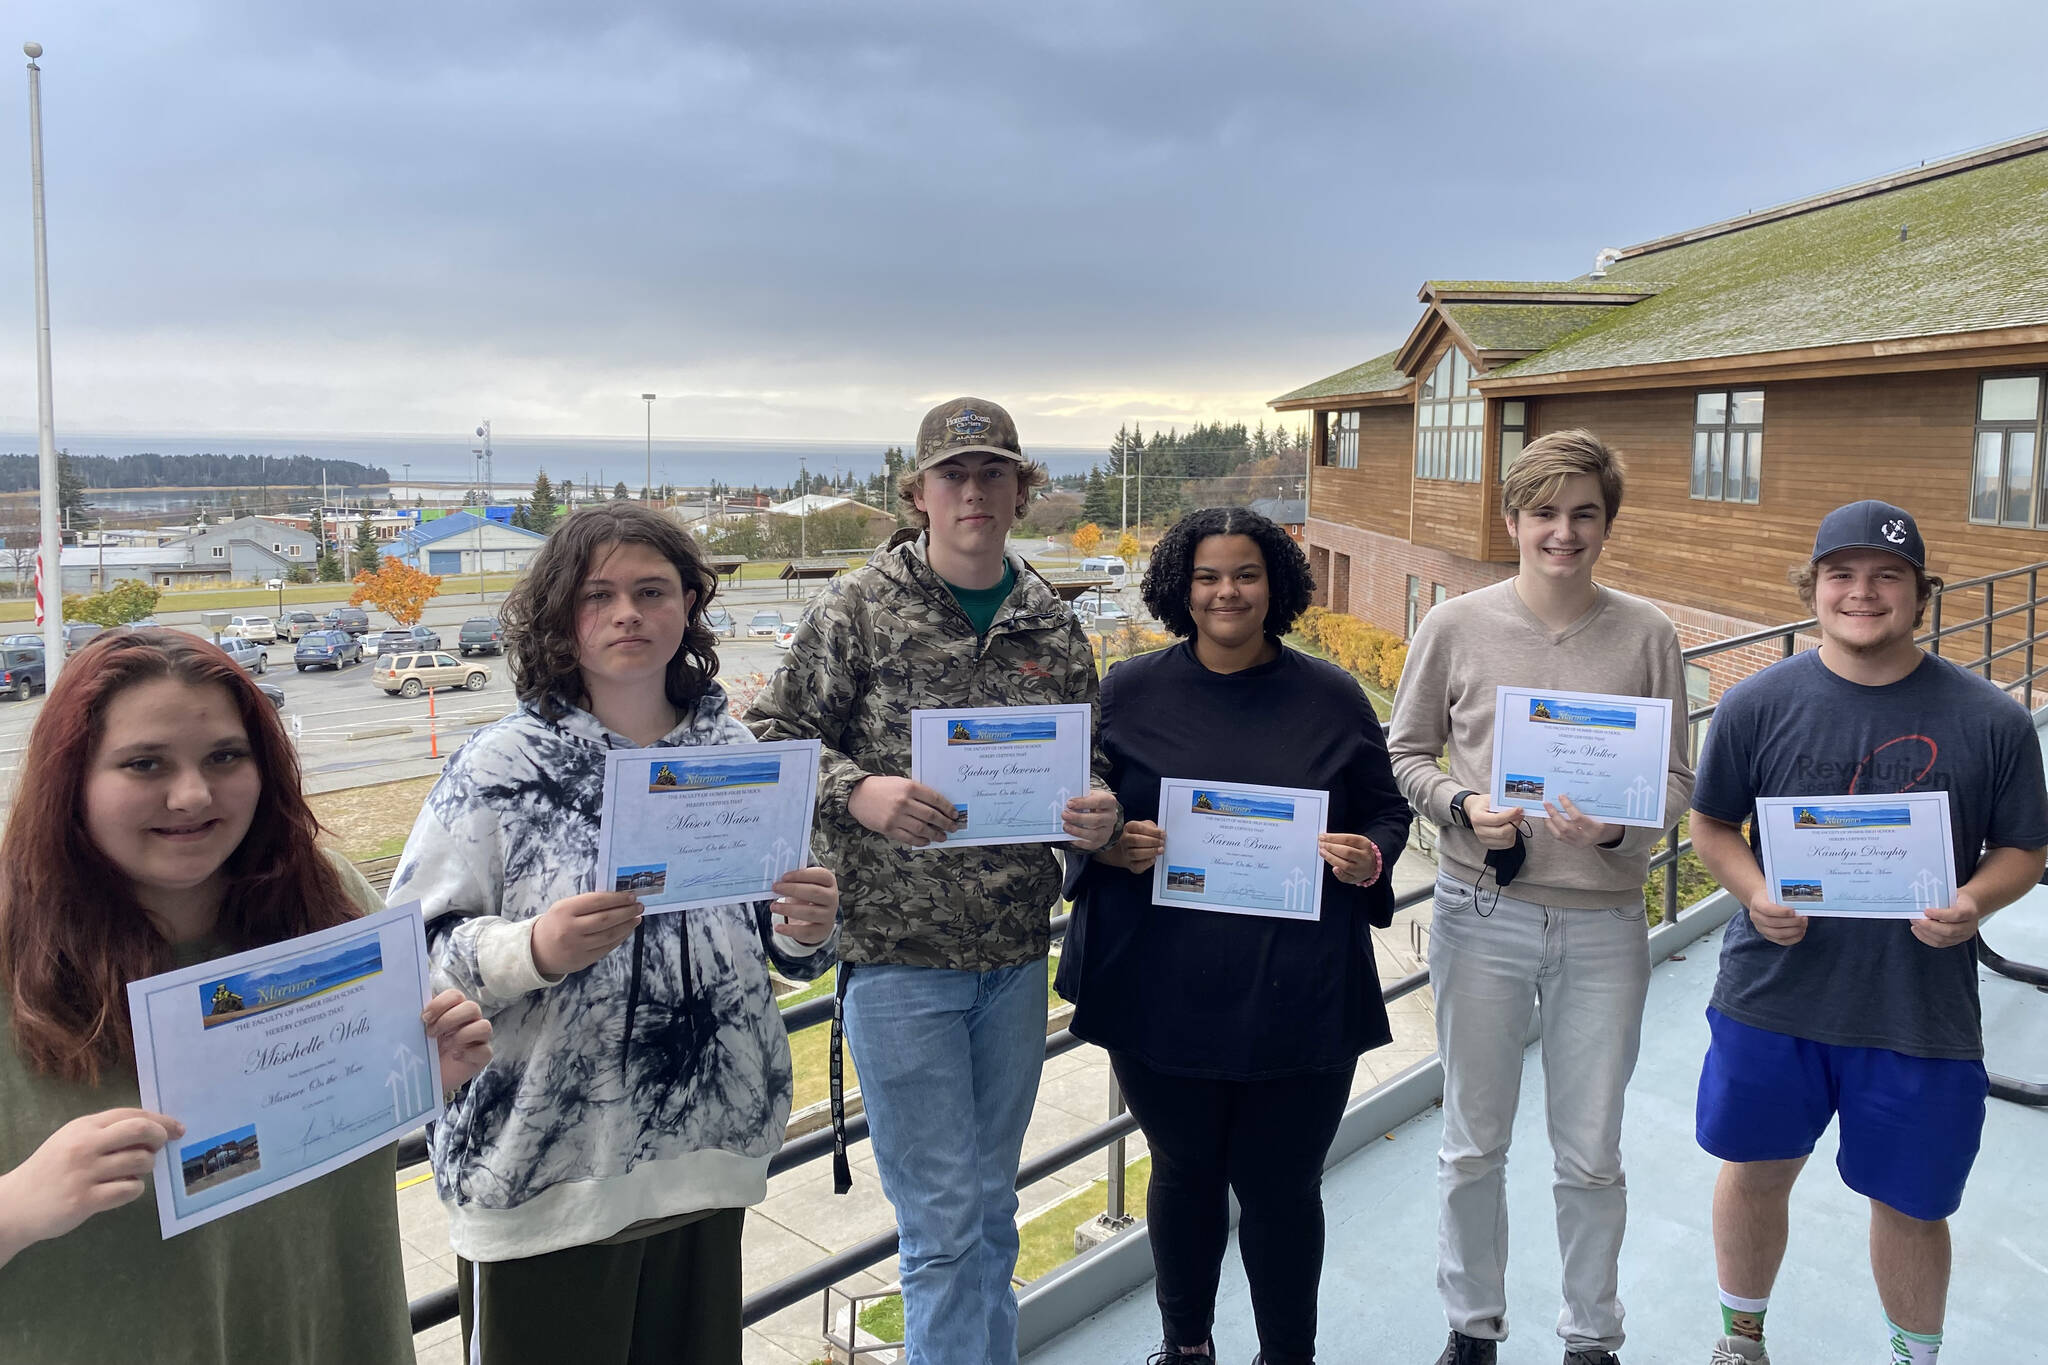 Homer High School's first quarter Mariners on the Move are Mischelle Wells, Mason Watson, Zachary Stevenson, Karma Brame, Tyson Walker, Kamdyn Doughty, Jonah Martin (not pictured) and Julie Guess (not pictured).